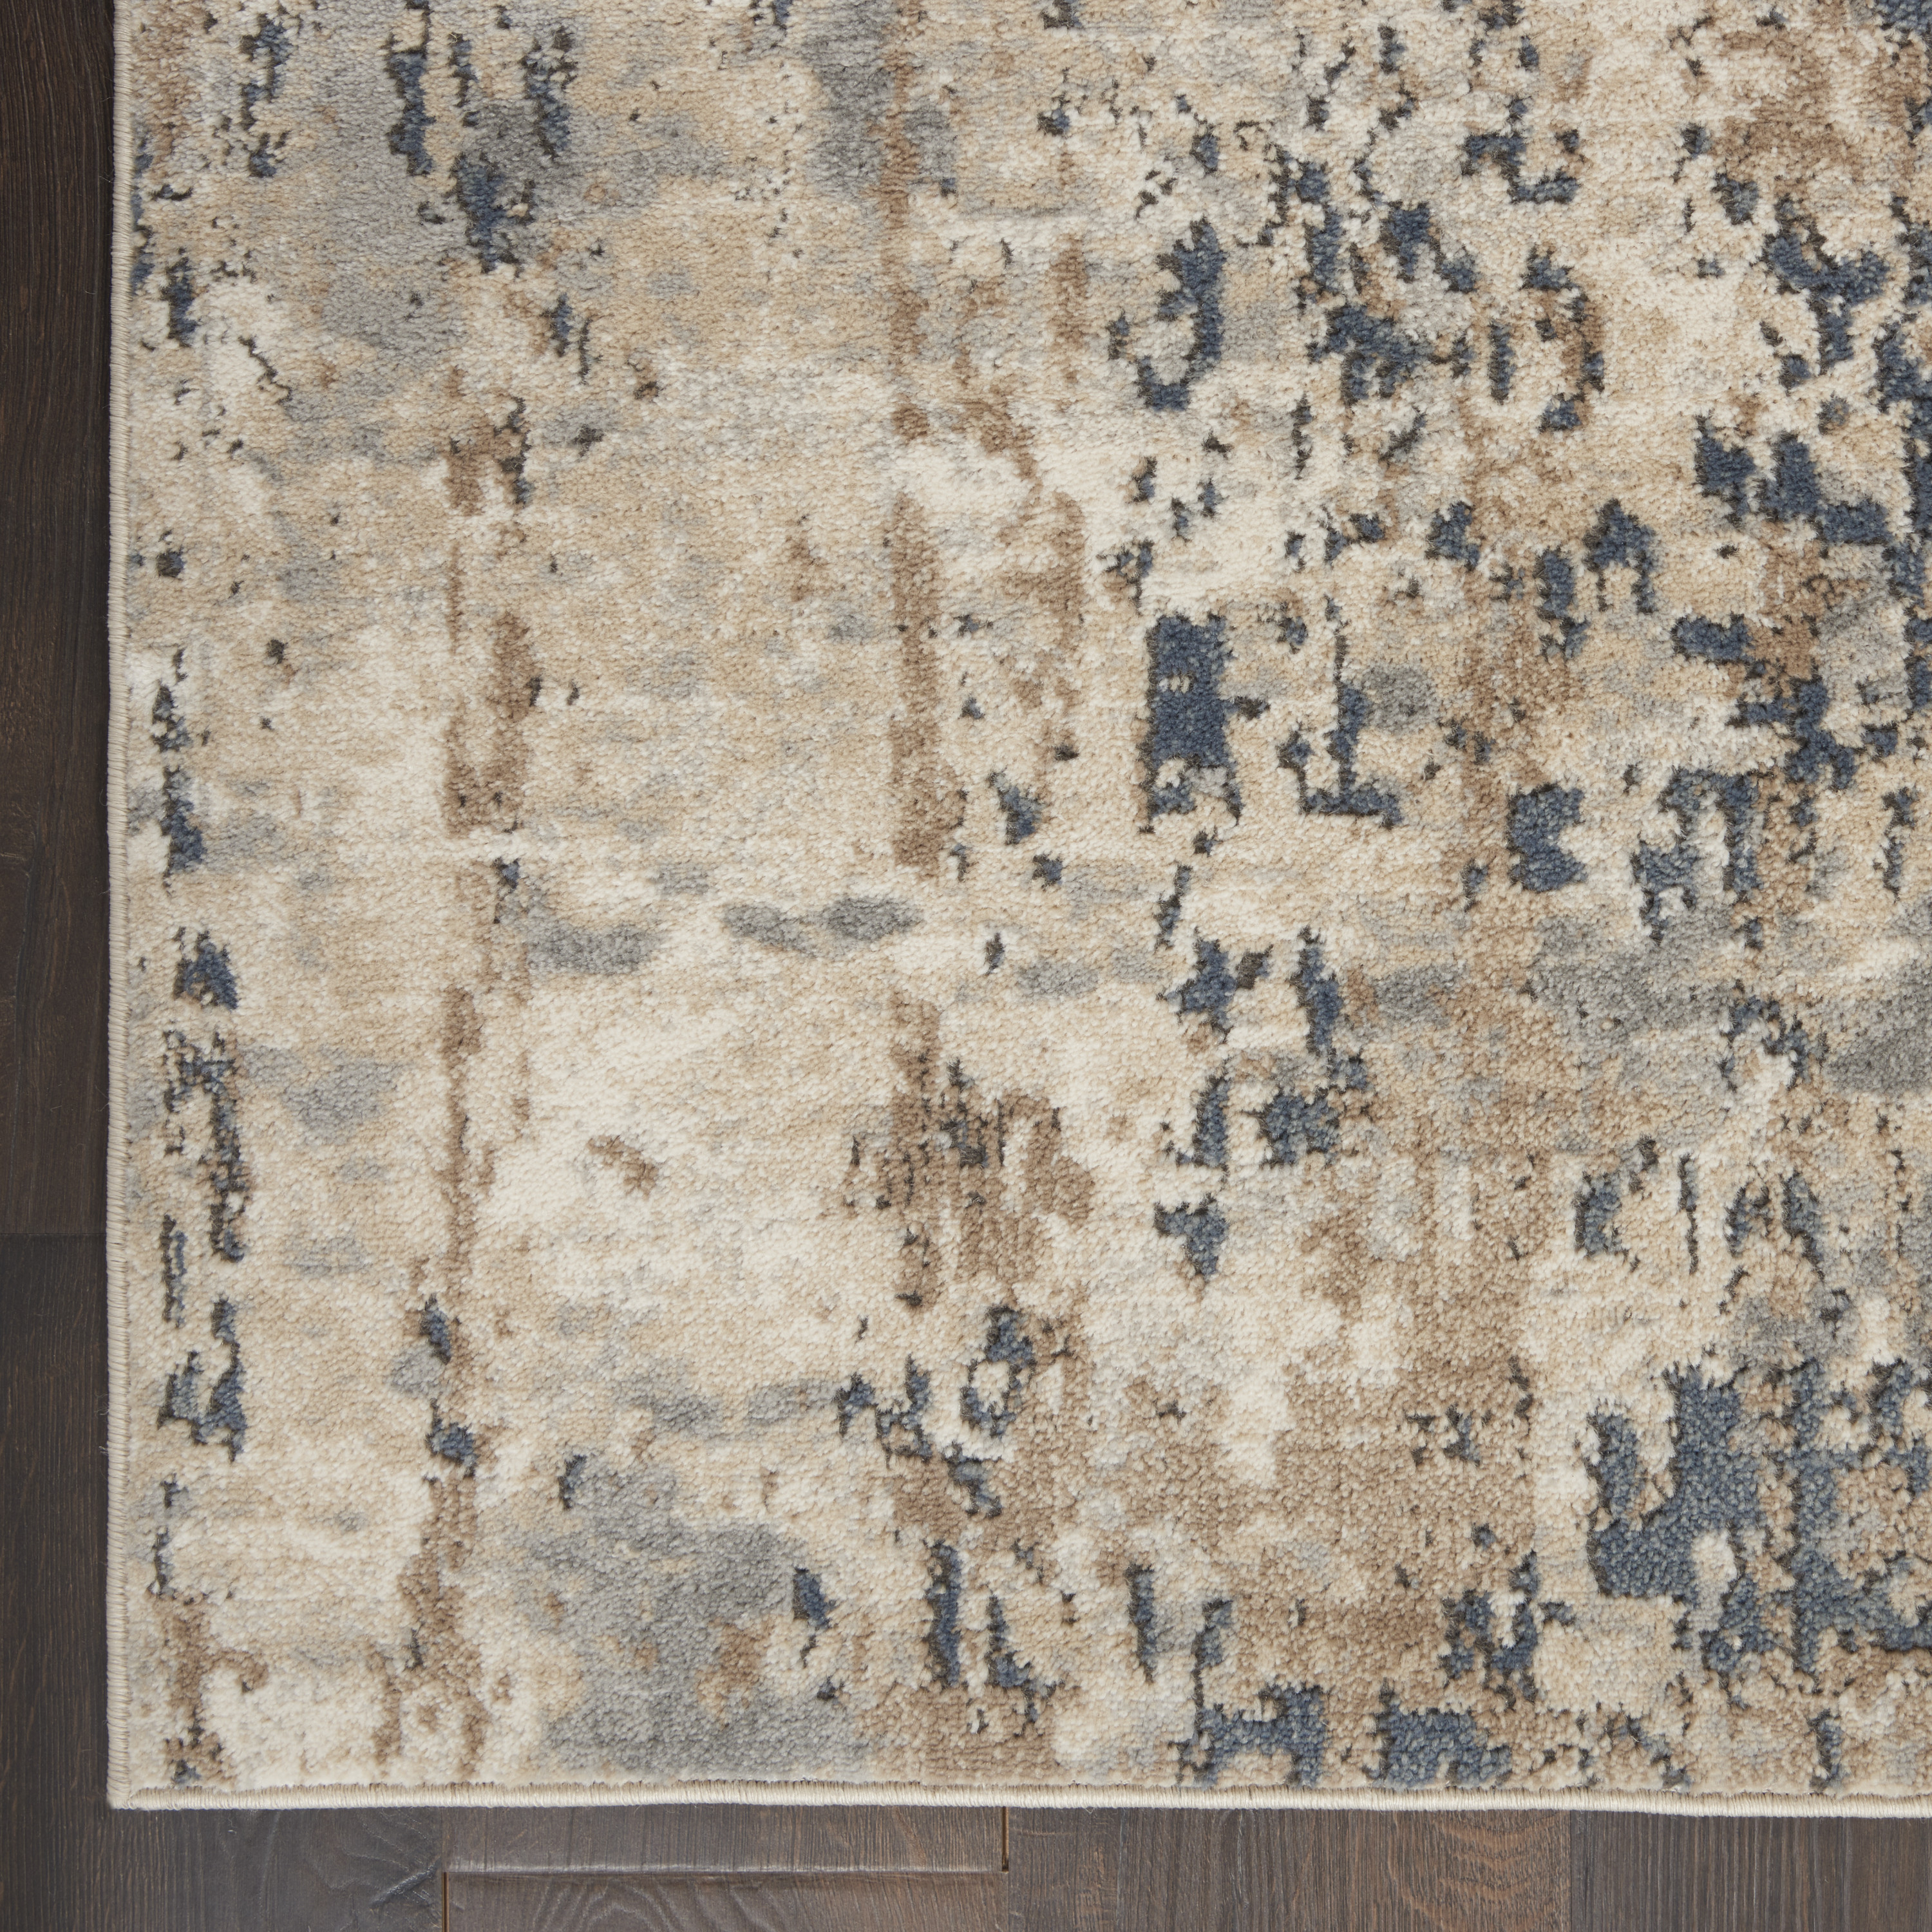 Nourison Concerto Abstract Beige Grey 2'2" x 20' Area Rug (2x20) - image 4 of 7